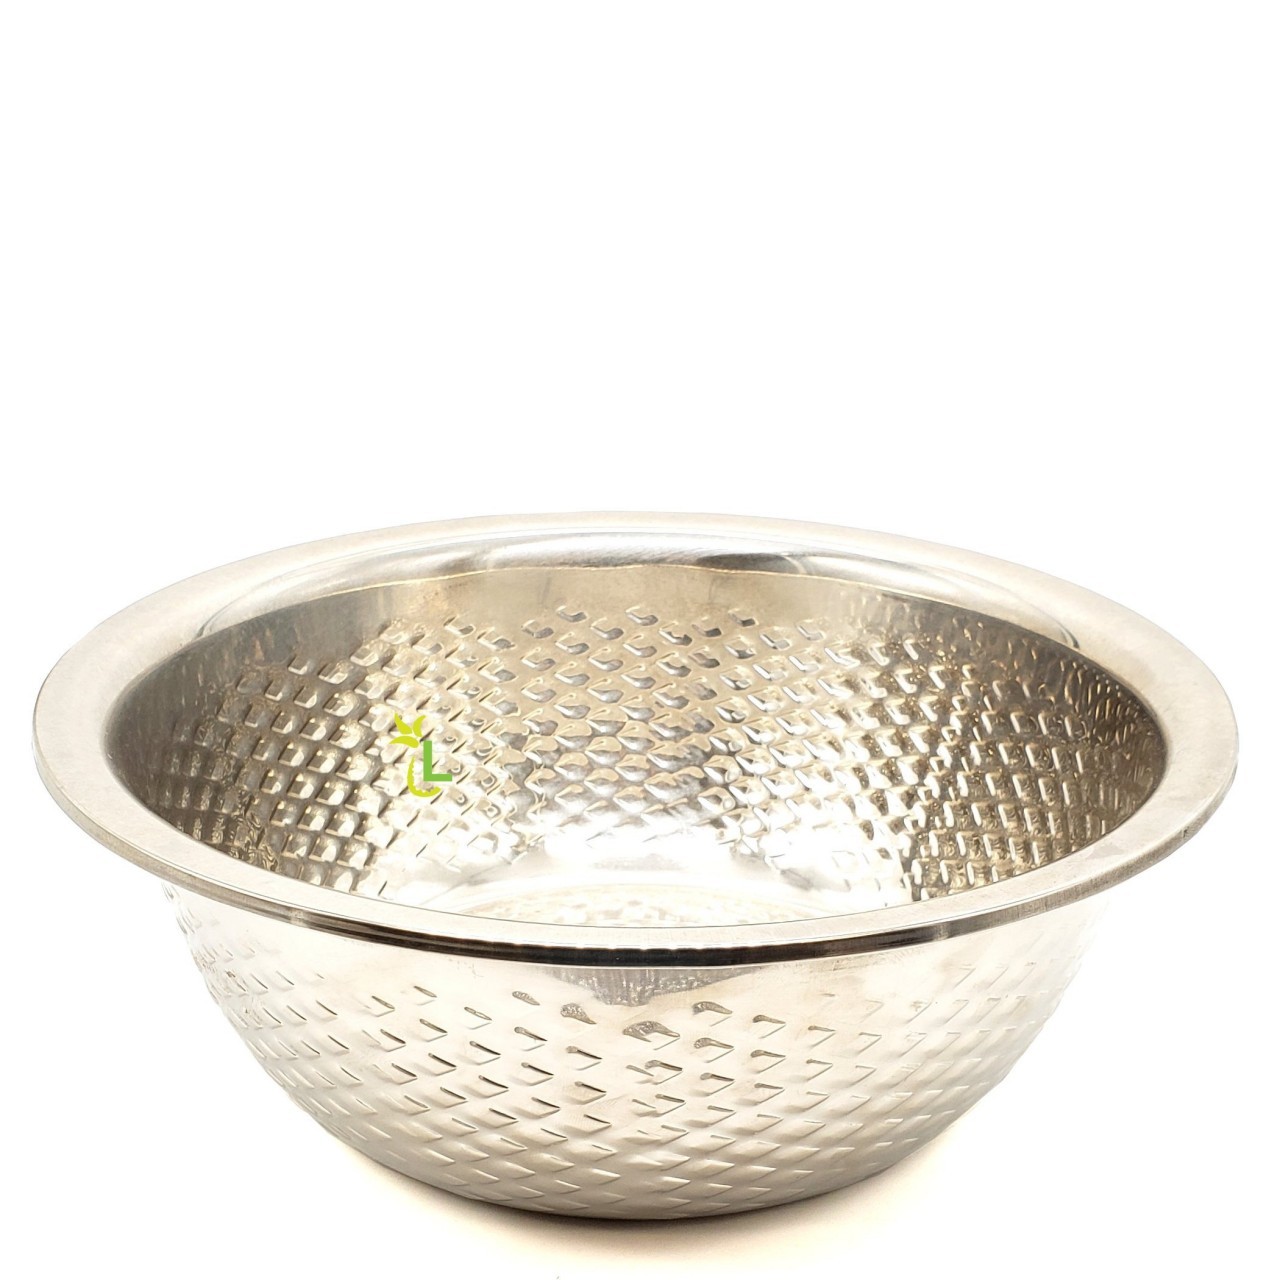 BISTRO MIXING BOWL STAINLESS STEEL 9in